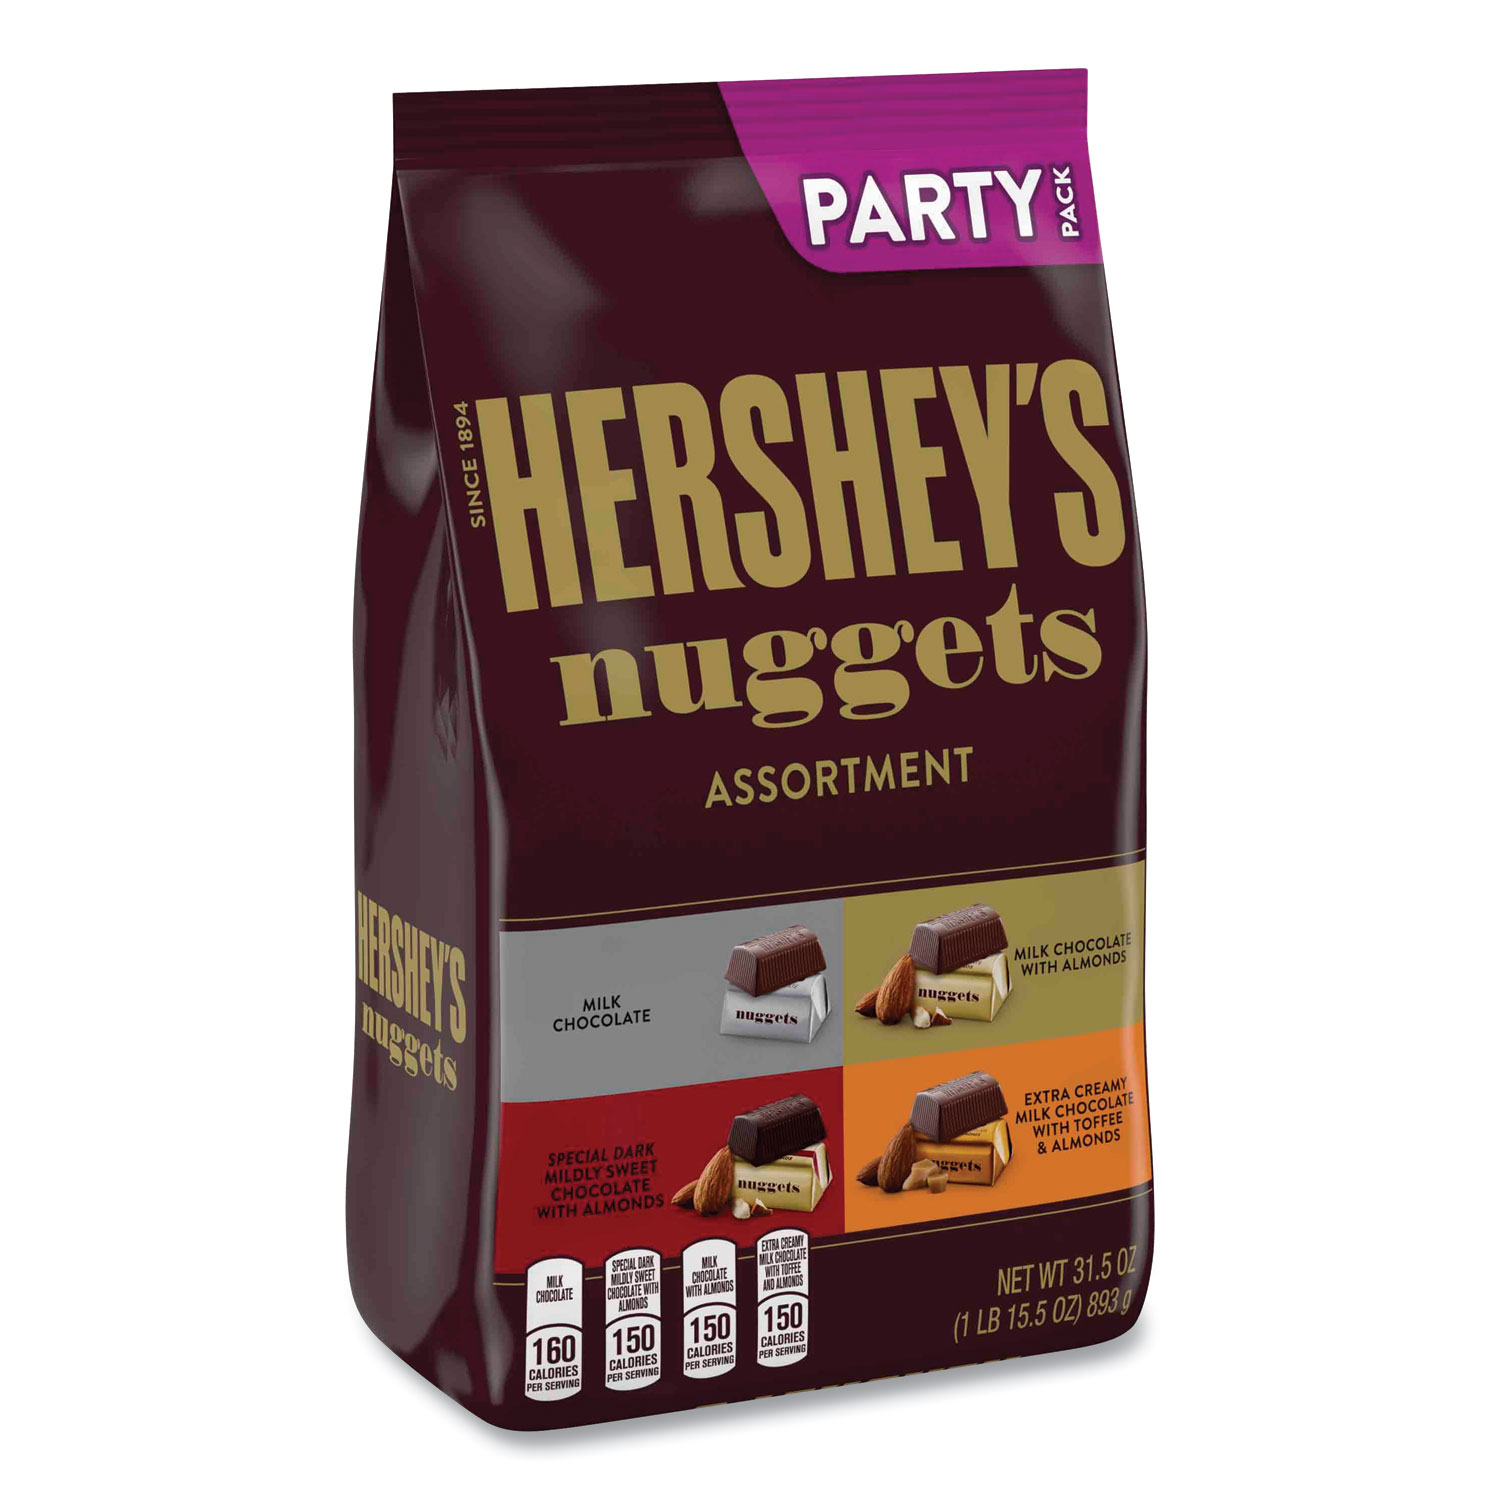  Hershey's 1878 Nuggets Party Pack, Assorted, 31.5 oz Bag, Free Delivery in 1-4 Business Days (GRR24600411) 